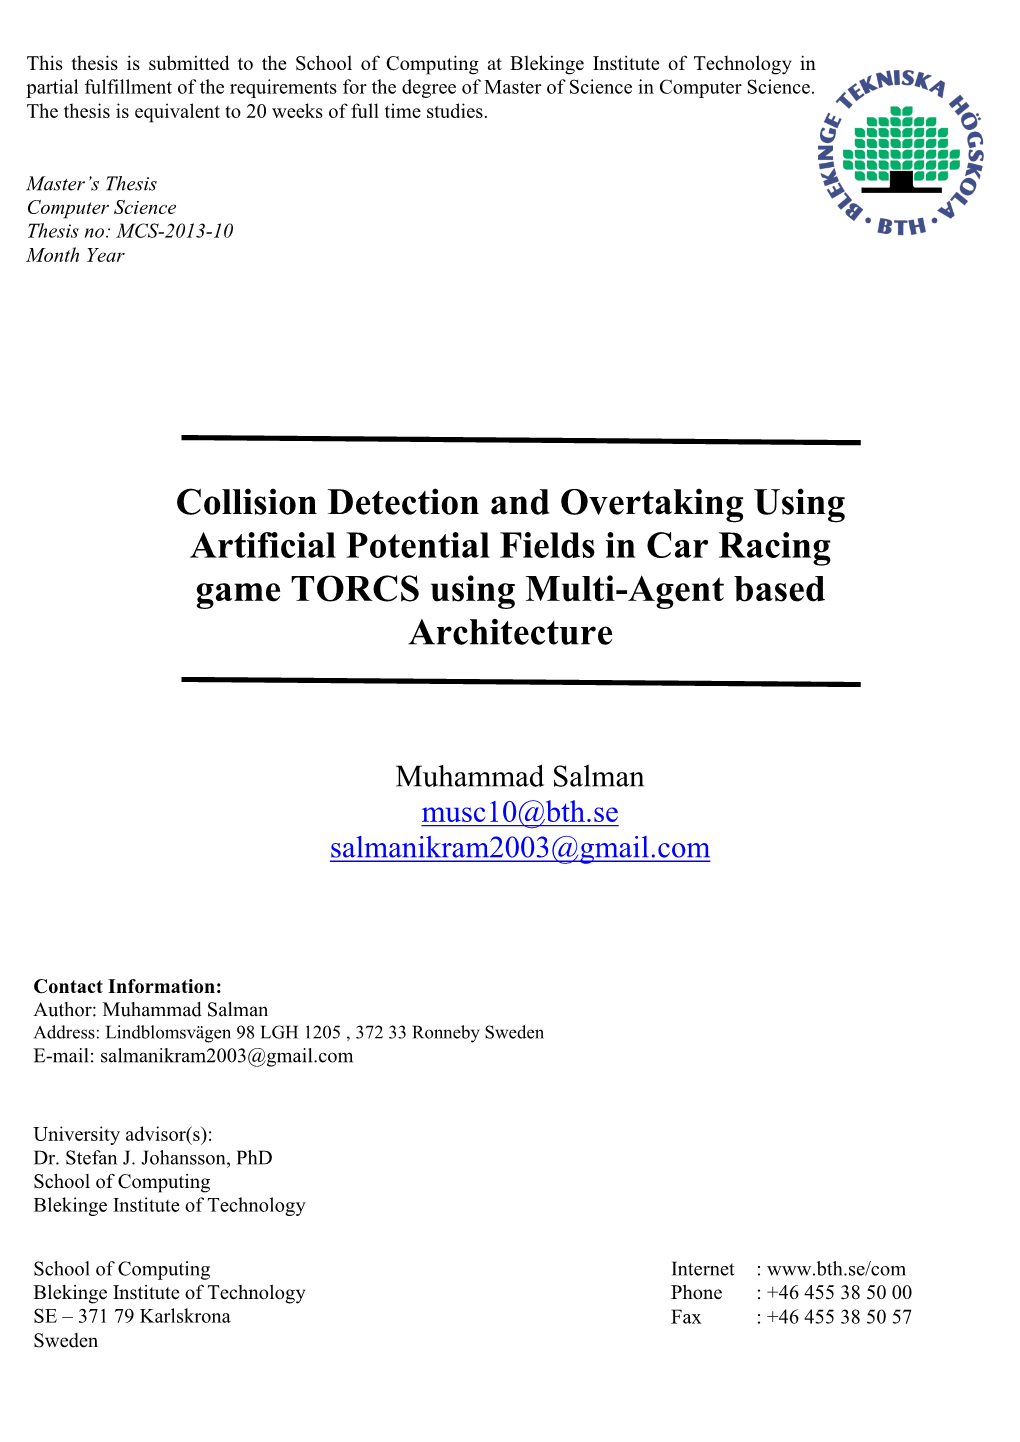 Collision Detection and Overtaking Using Artificial Potential Fields in Car Racing Game TORCS Using Multi-Agent Based Architecture